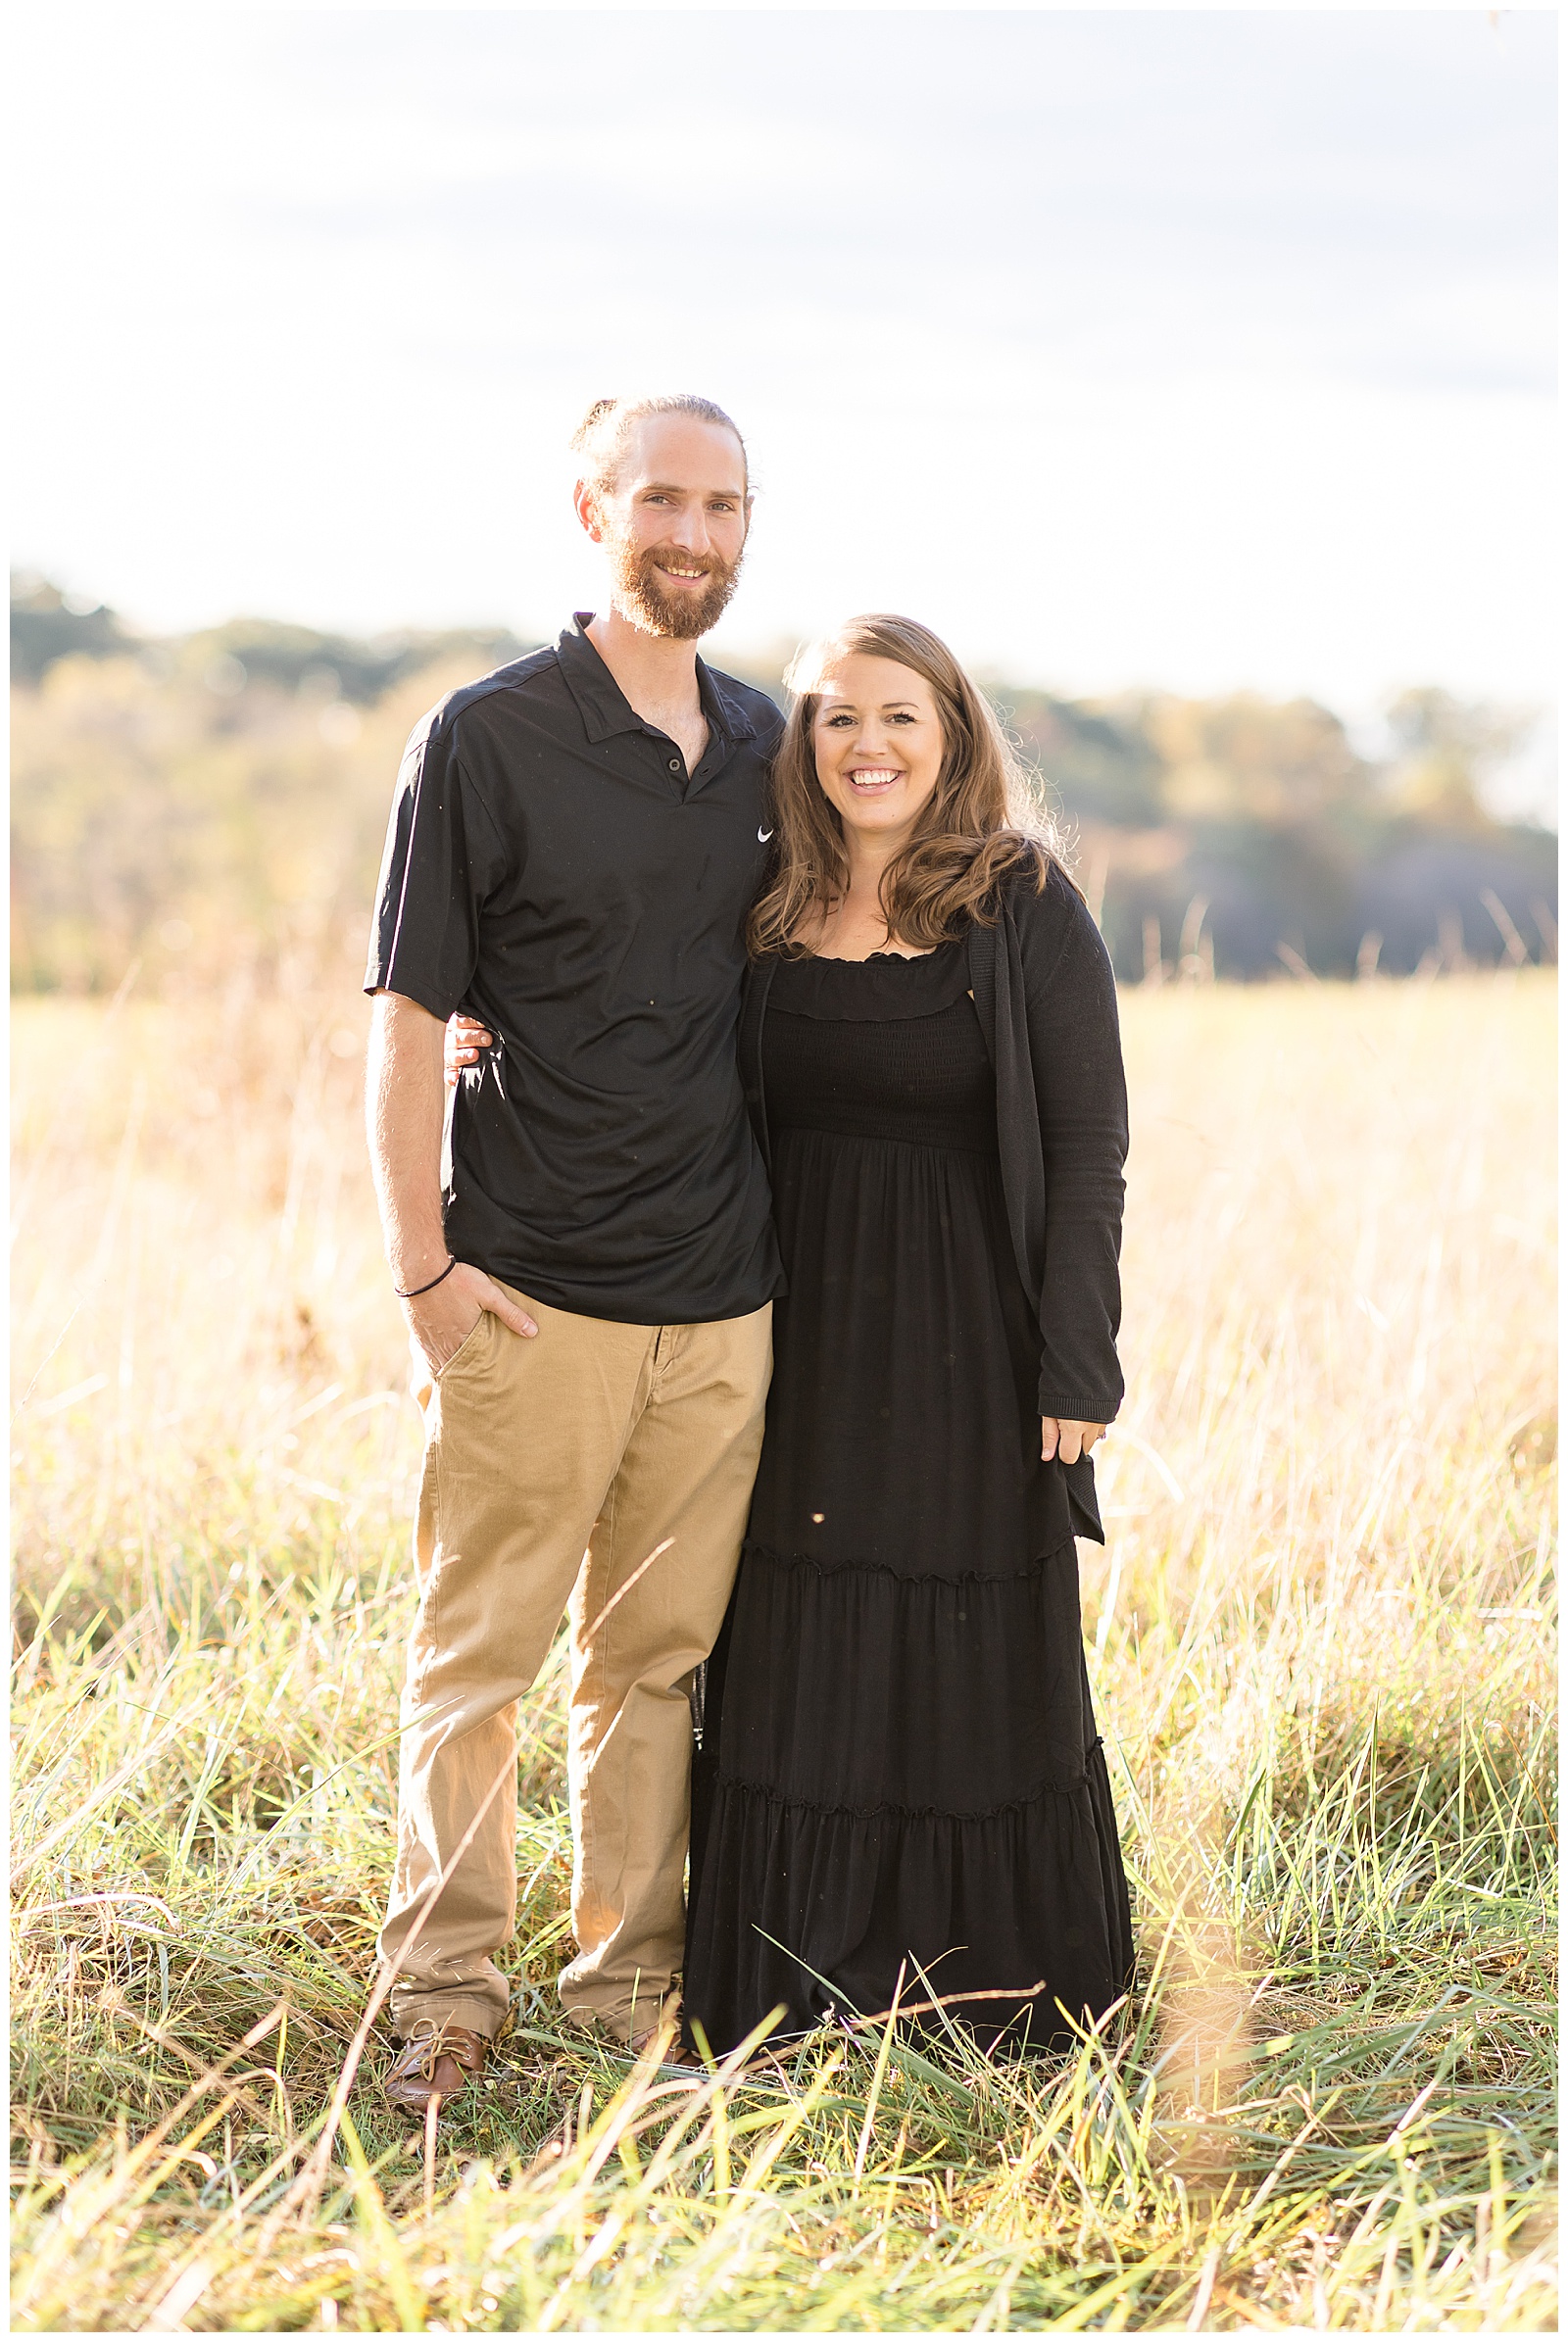 Husband and wife stand in a field in Richmond, VA wearing black outfits for Rebecca Rice's behind the lens membership class.